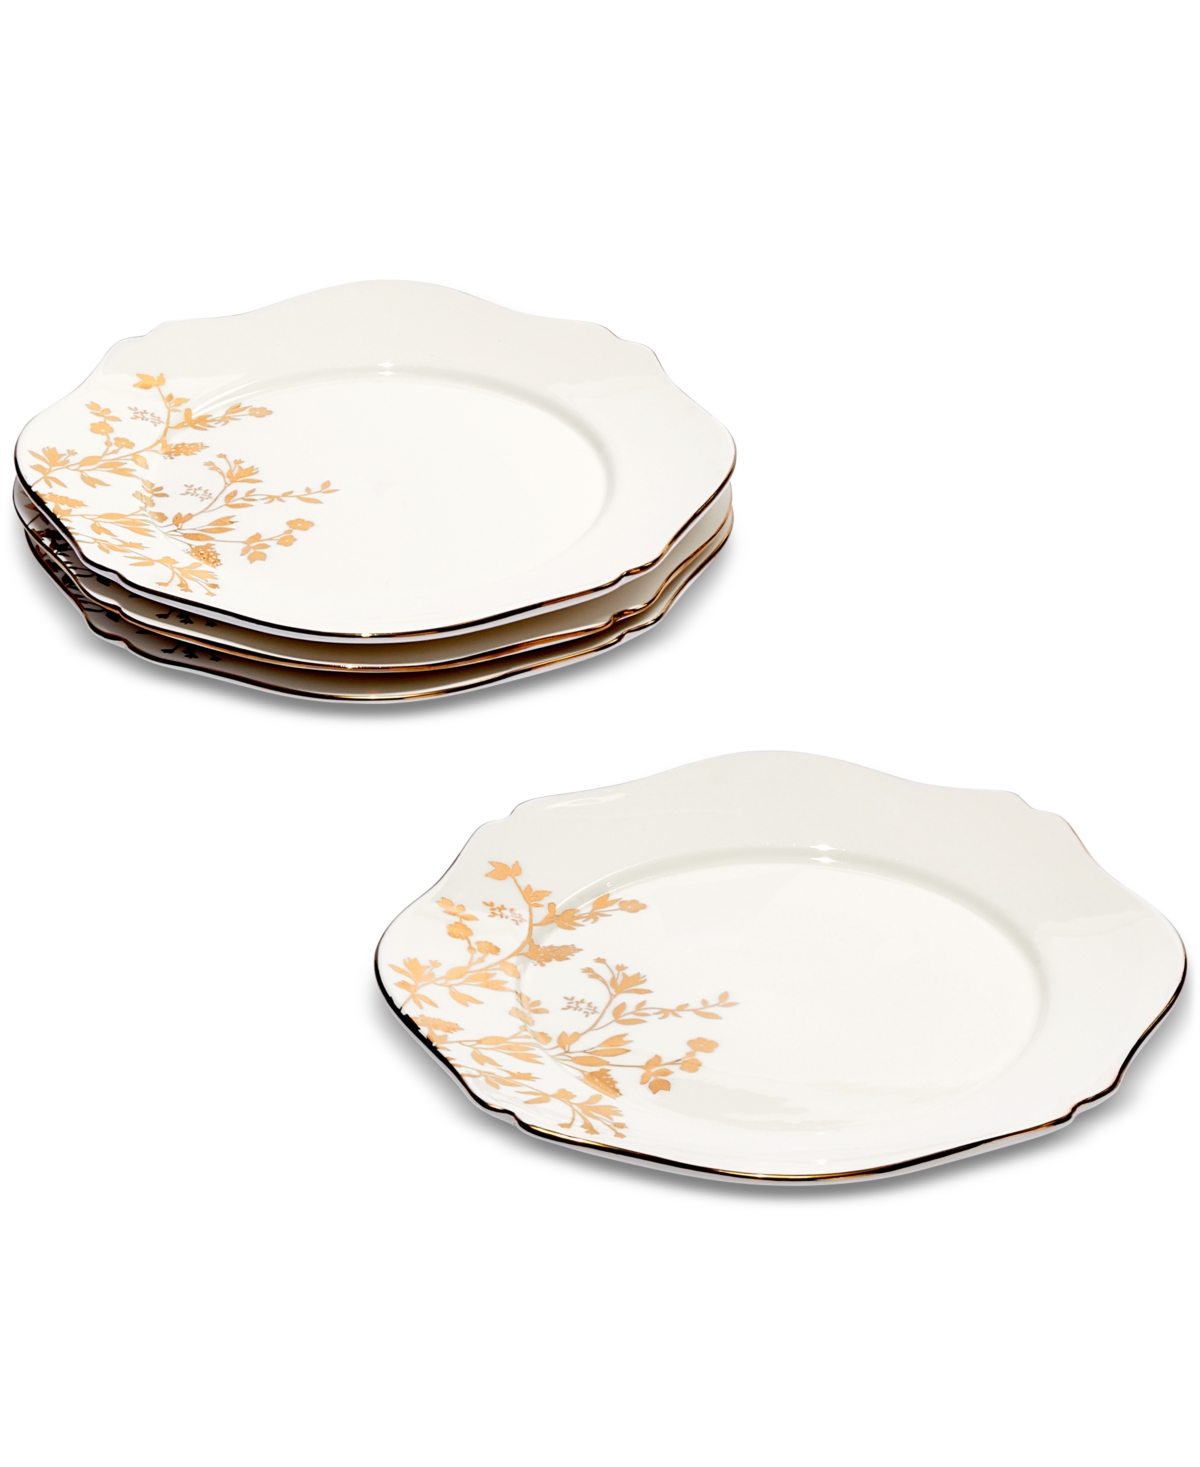 Gilded Salad Plates, Set of 4, Created for Macy's - Gold